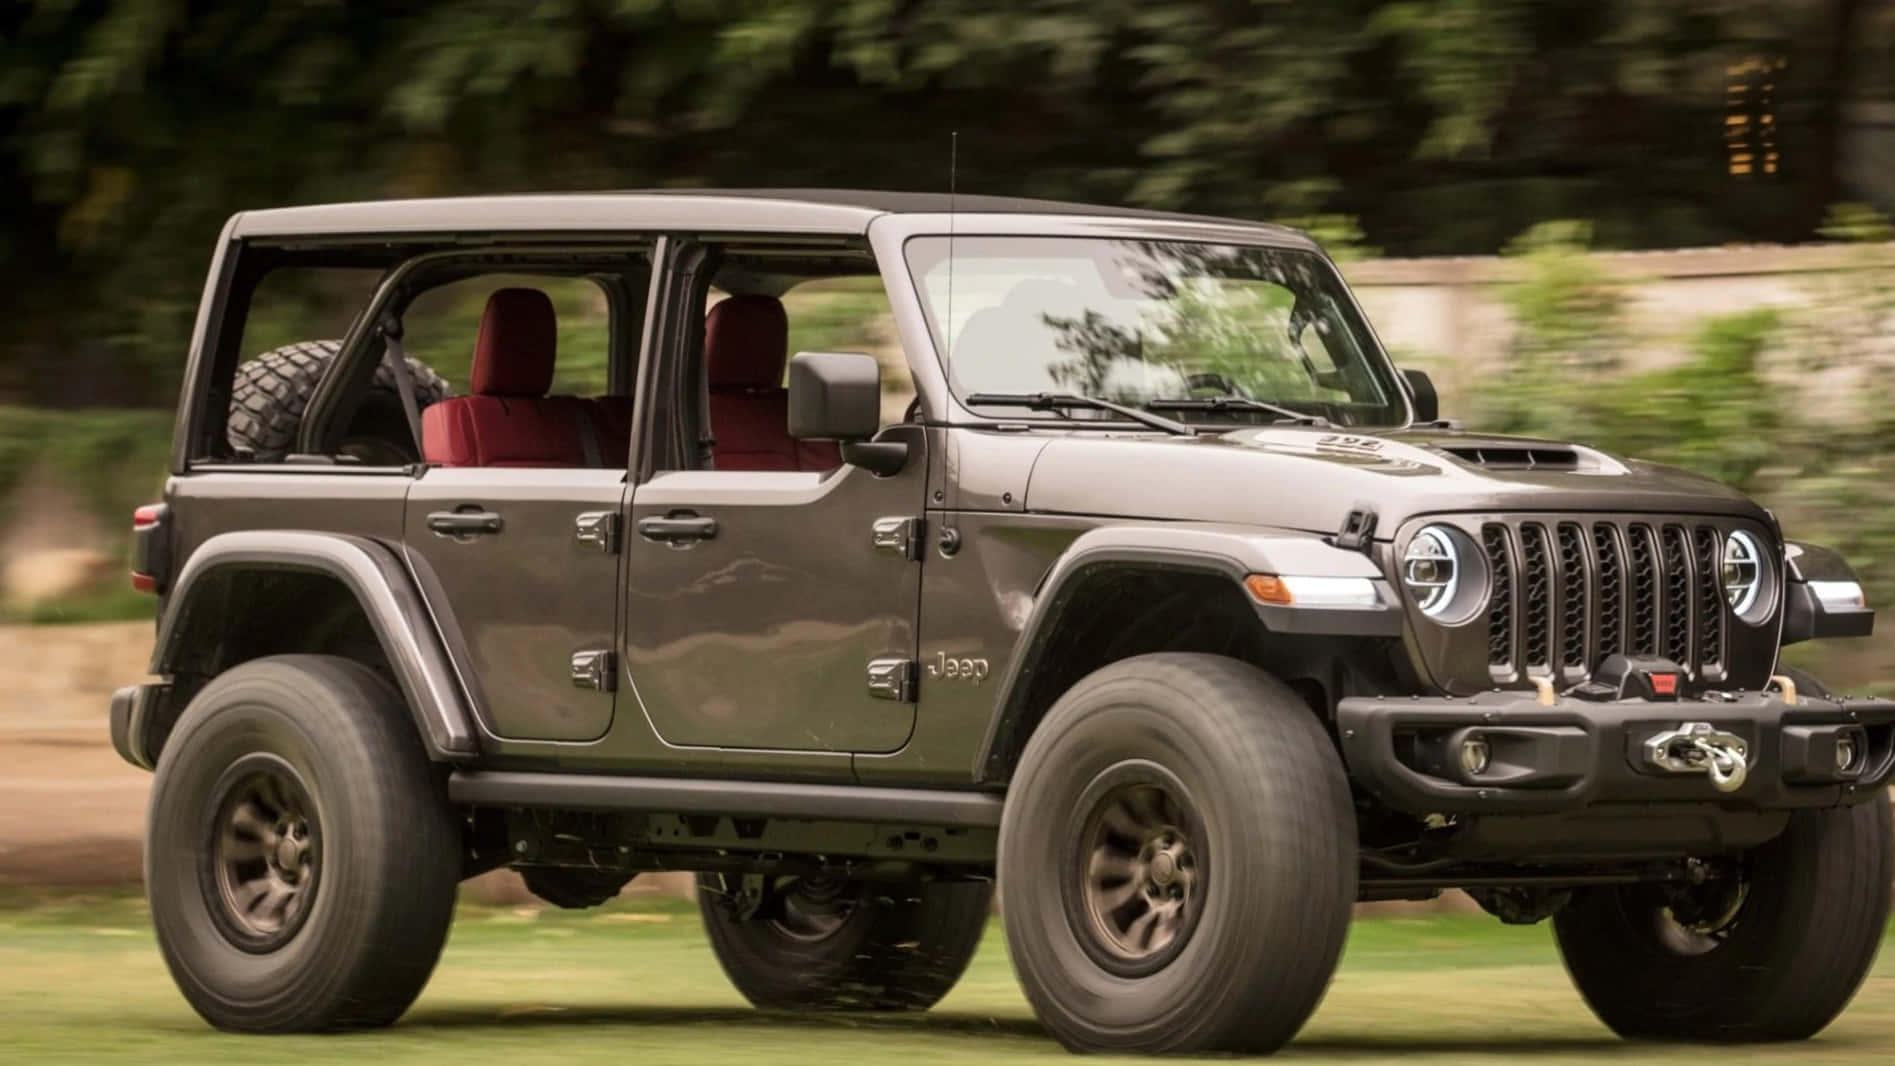 The Jeep Wrangler Is Driving Down The Road